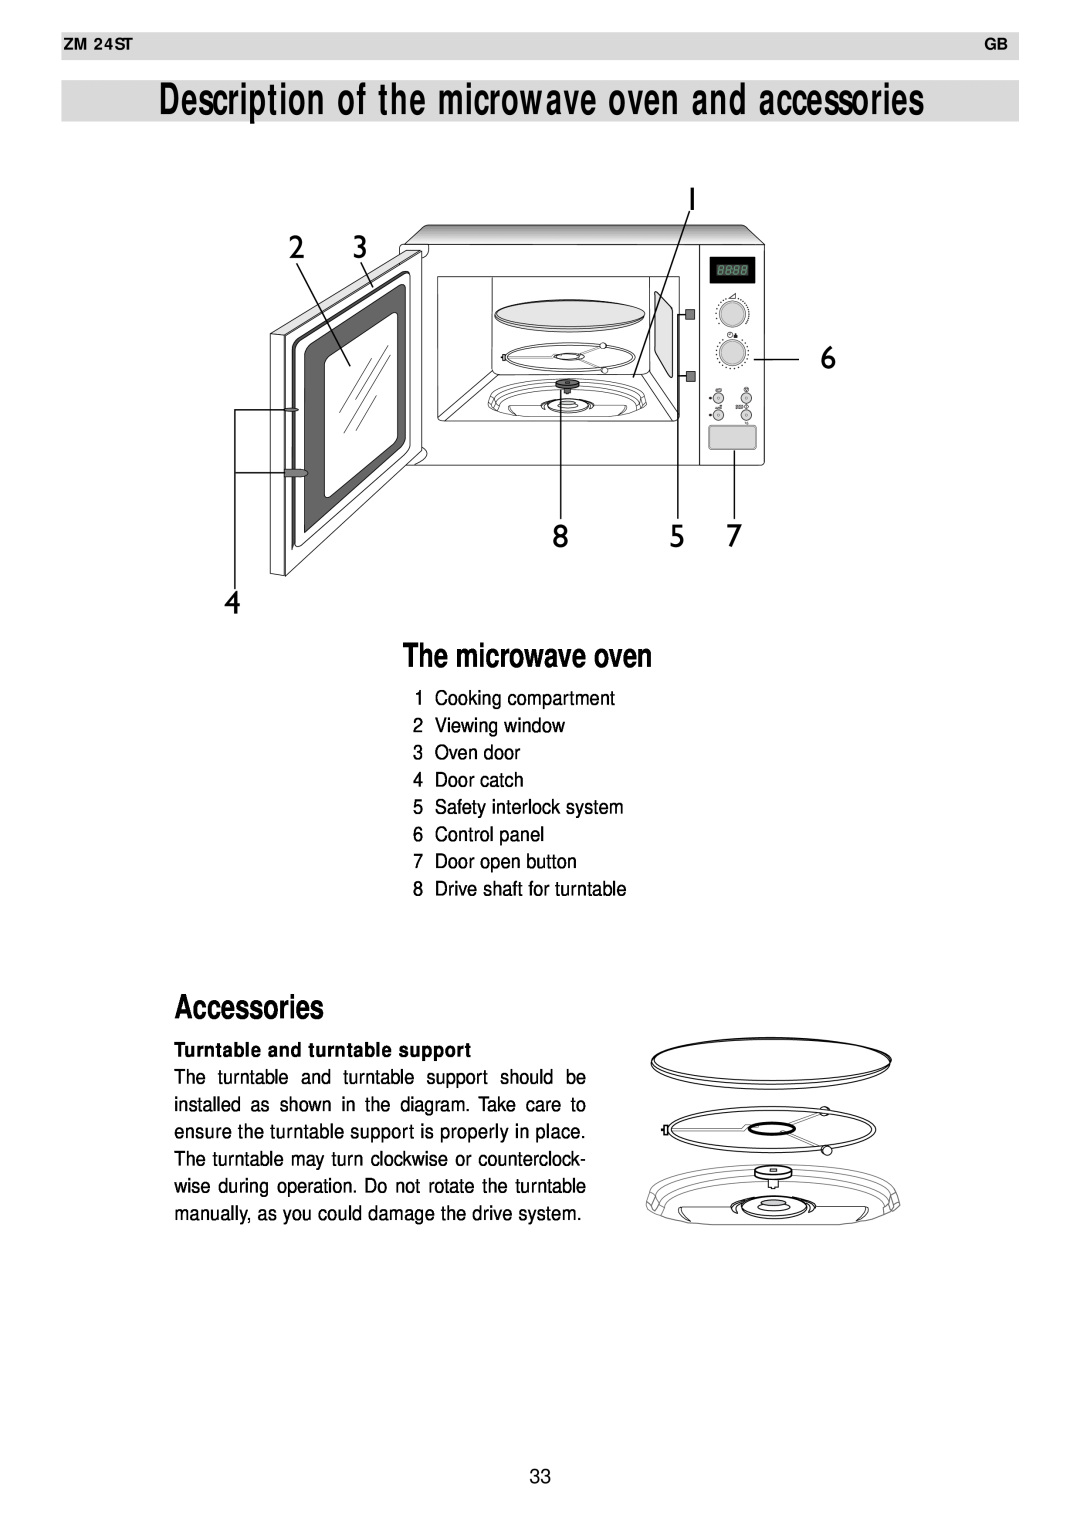 Zanussi AG125 quick start The microwave oven, Accessories, Description of the microwave oven and accessories 